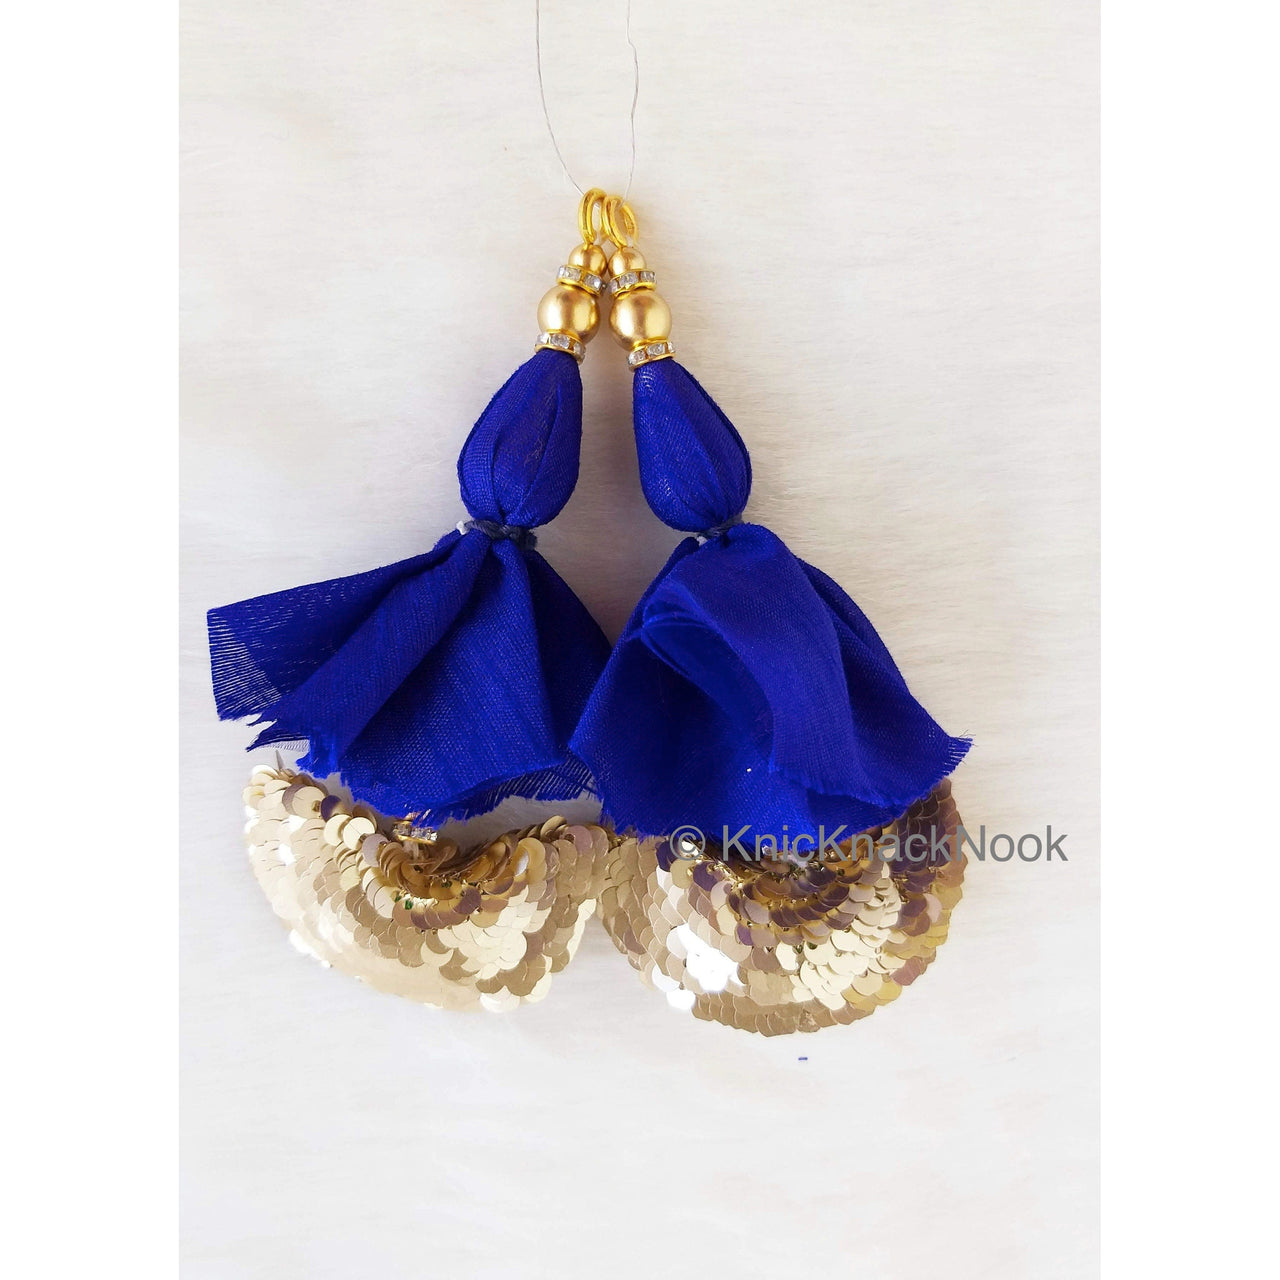 Red / Blue Art Silk Latkan Embellished With Gold Sequins And Beads, Bridal Tassels, Decorative Tassels